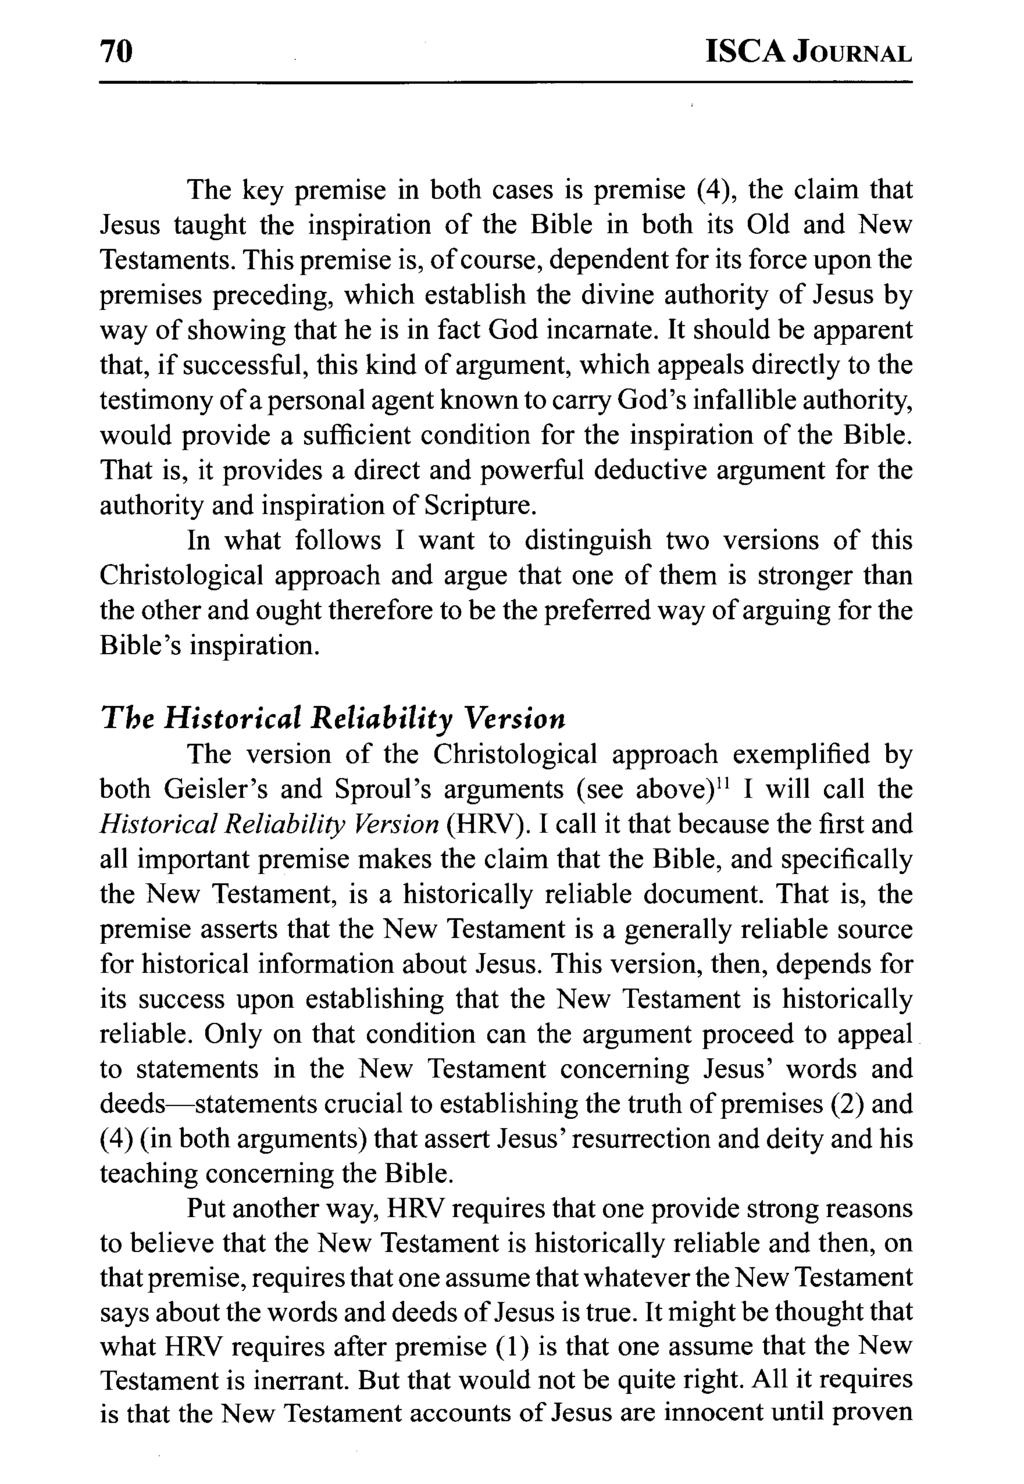 70 ISCA JOURNAL The key premise in both cases is premise (4), the claim that Jesus taught the inspiration of the Bible in both its Old and New Testaments.